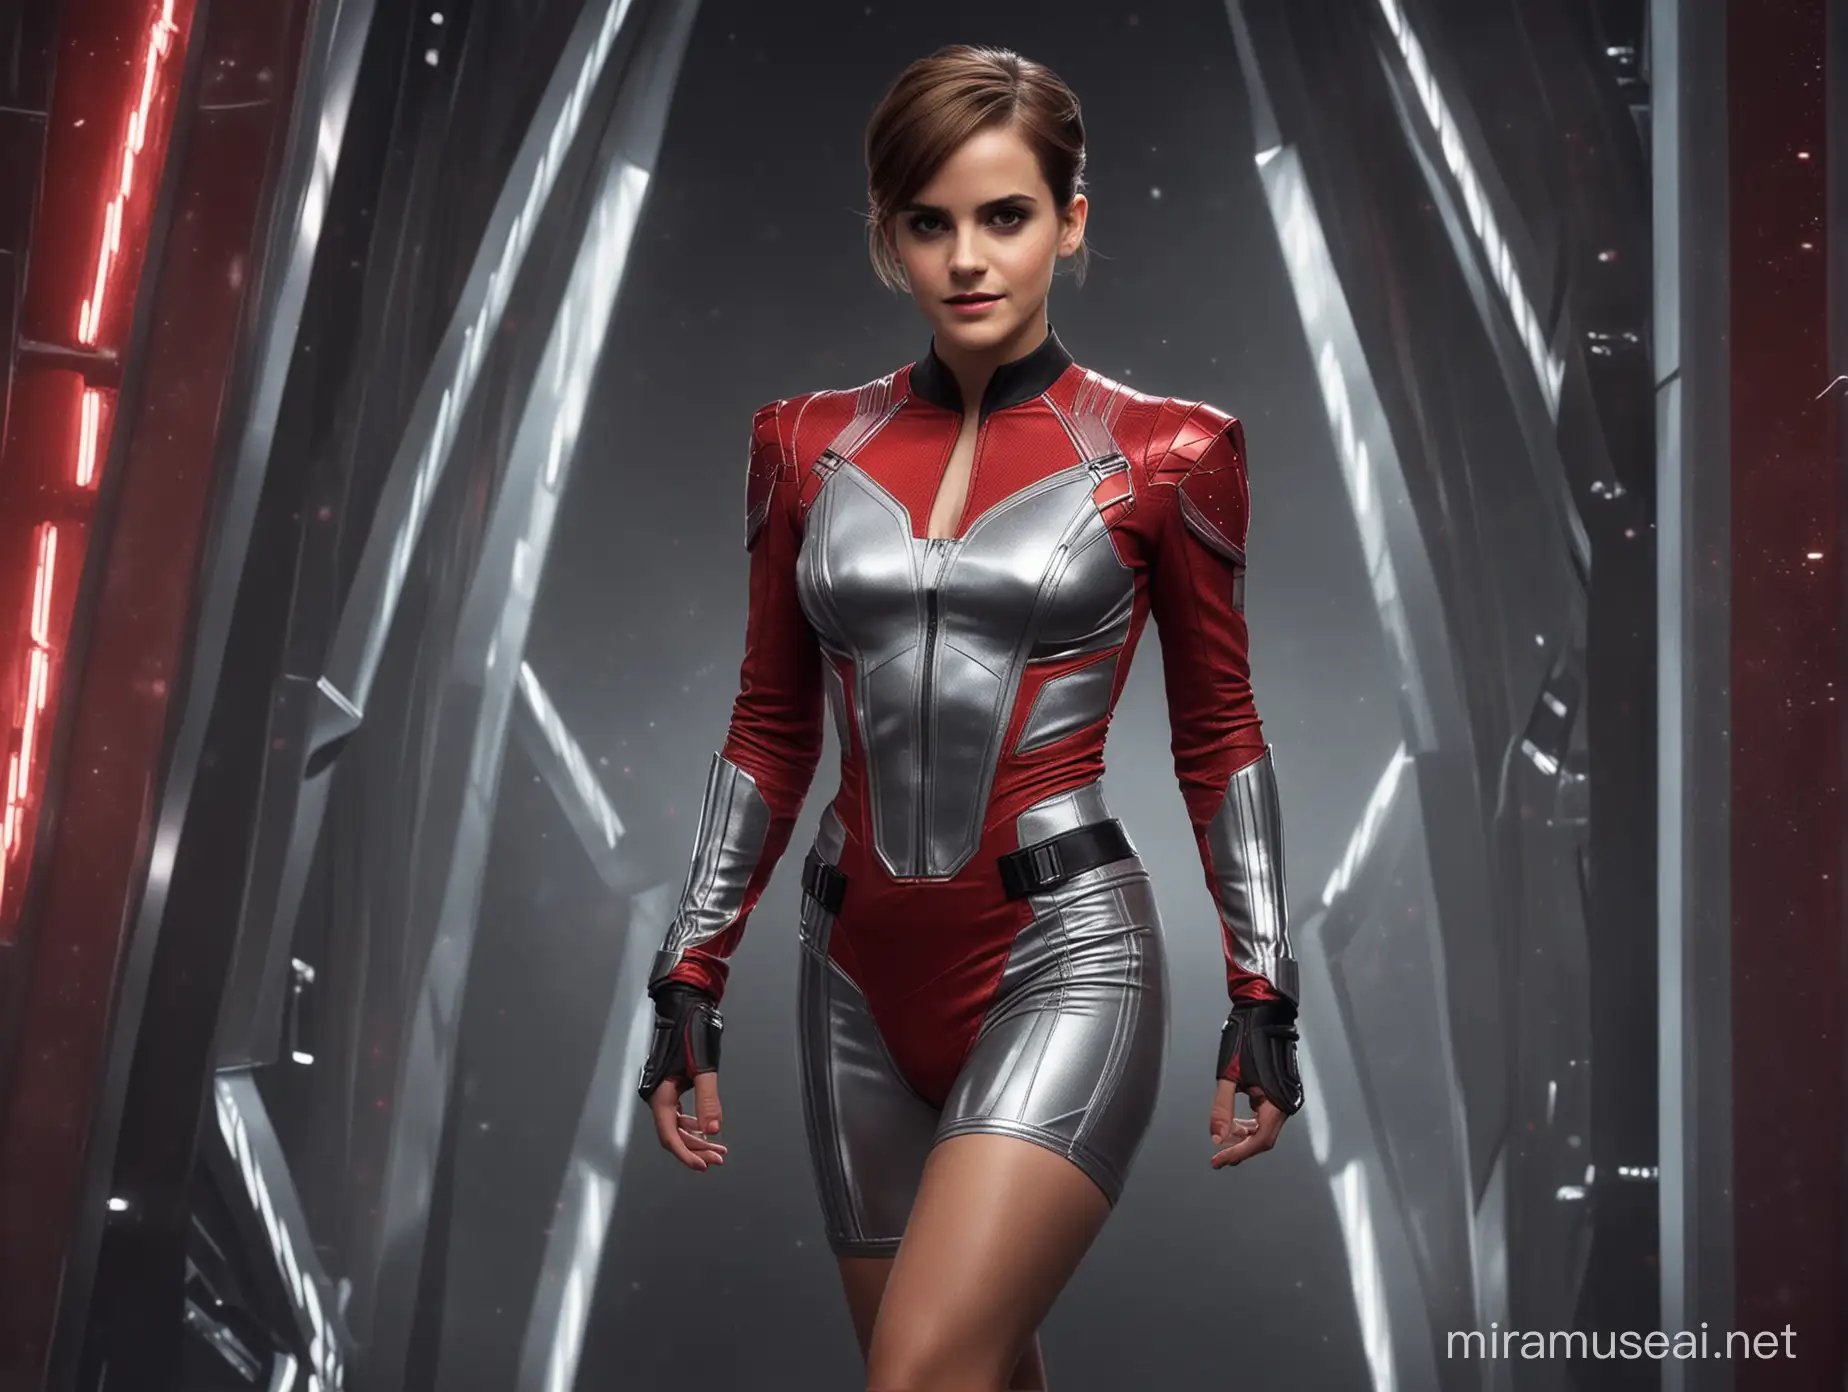 full body view of beautiful, sophisticated Emma Watson wearing very revealing skin-tight futuristic metallic red or silver star trek starfleet uniform with high-tech details and  panels of mesh or cutout panels. subtle smile. Intricately detailed beauty. bold makeup, lipstick, bold eyeliner, eyeshadow. great legs. Short hair. fit athletic muscular body futuristic neon-lit scenario. seductive pose. cleavage. bare legs